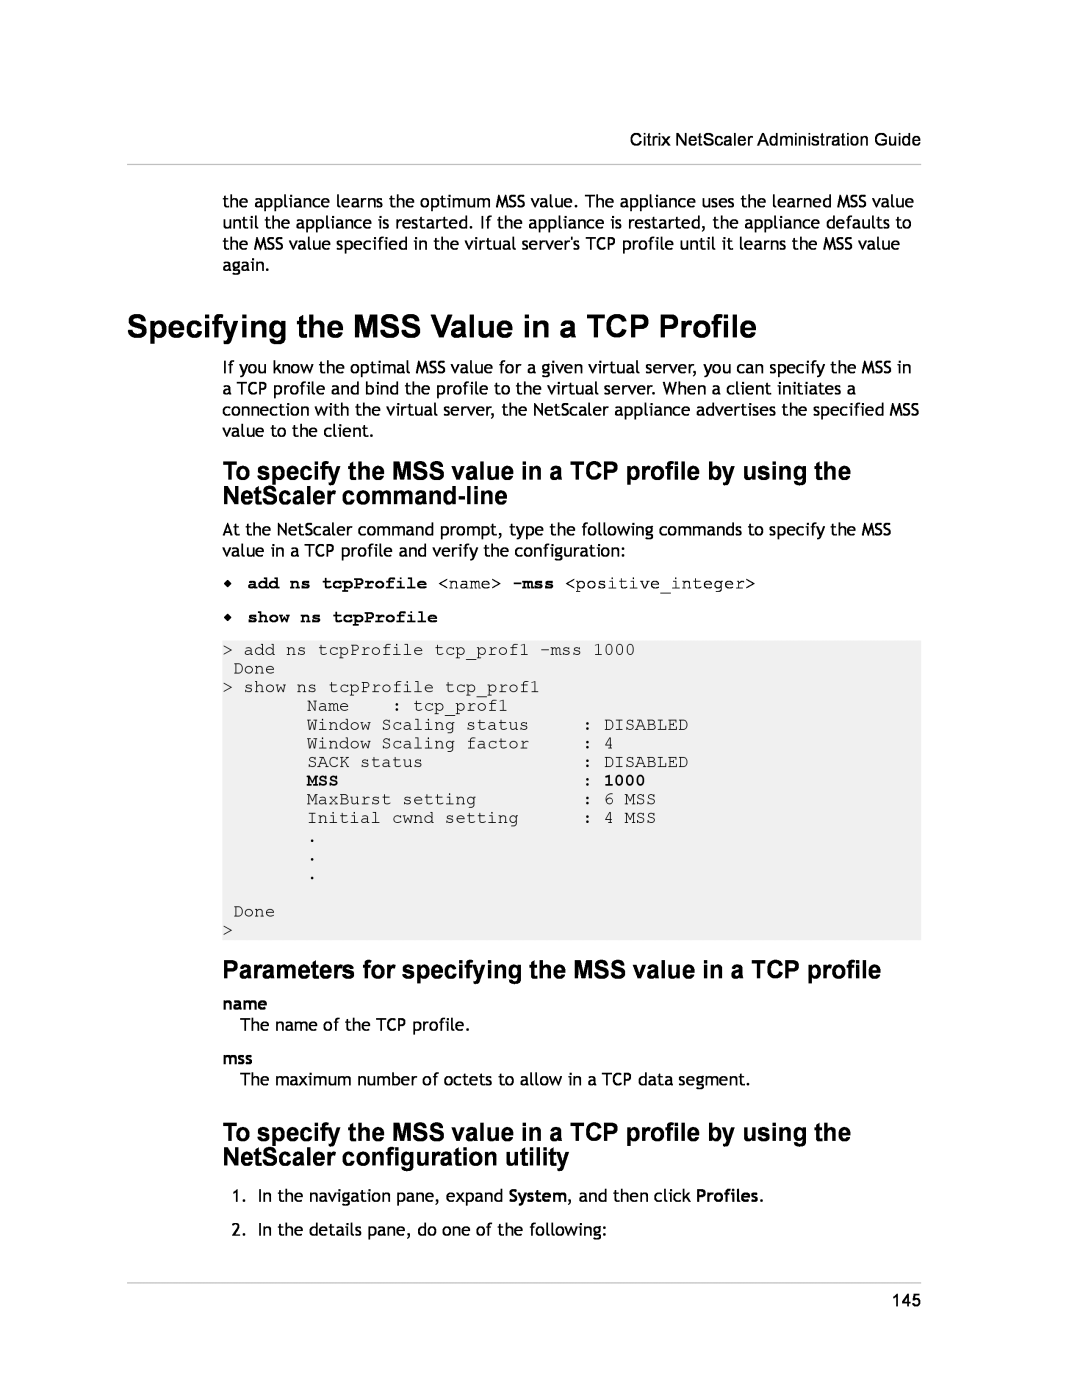 Citrix Systems CITRIX NETSCALER 9.3 manual Specifying the MSS Value in a TCP Profile 